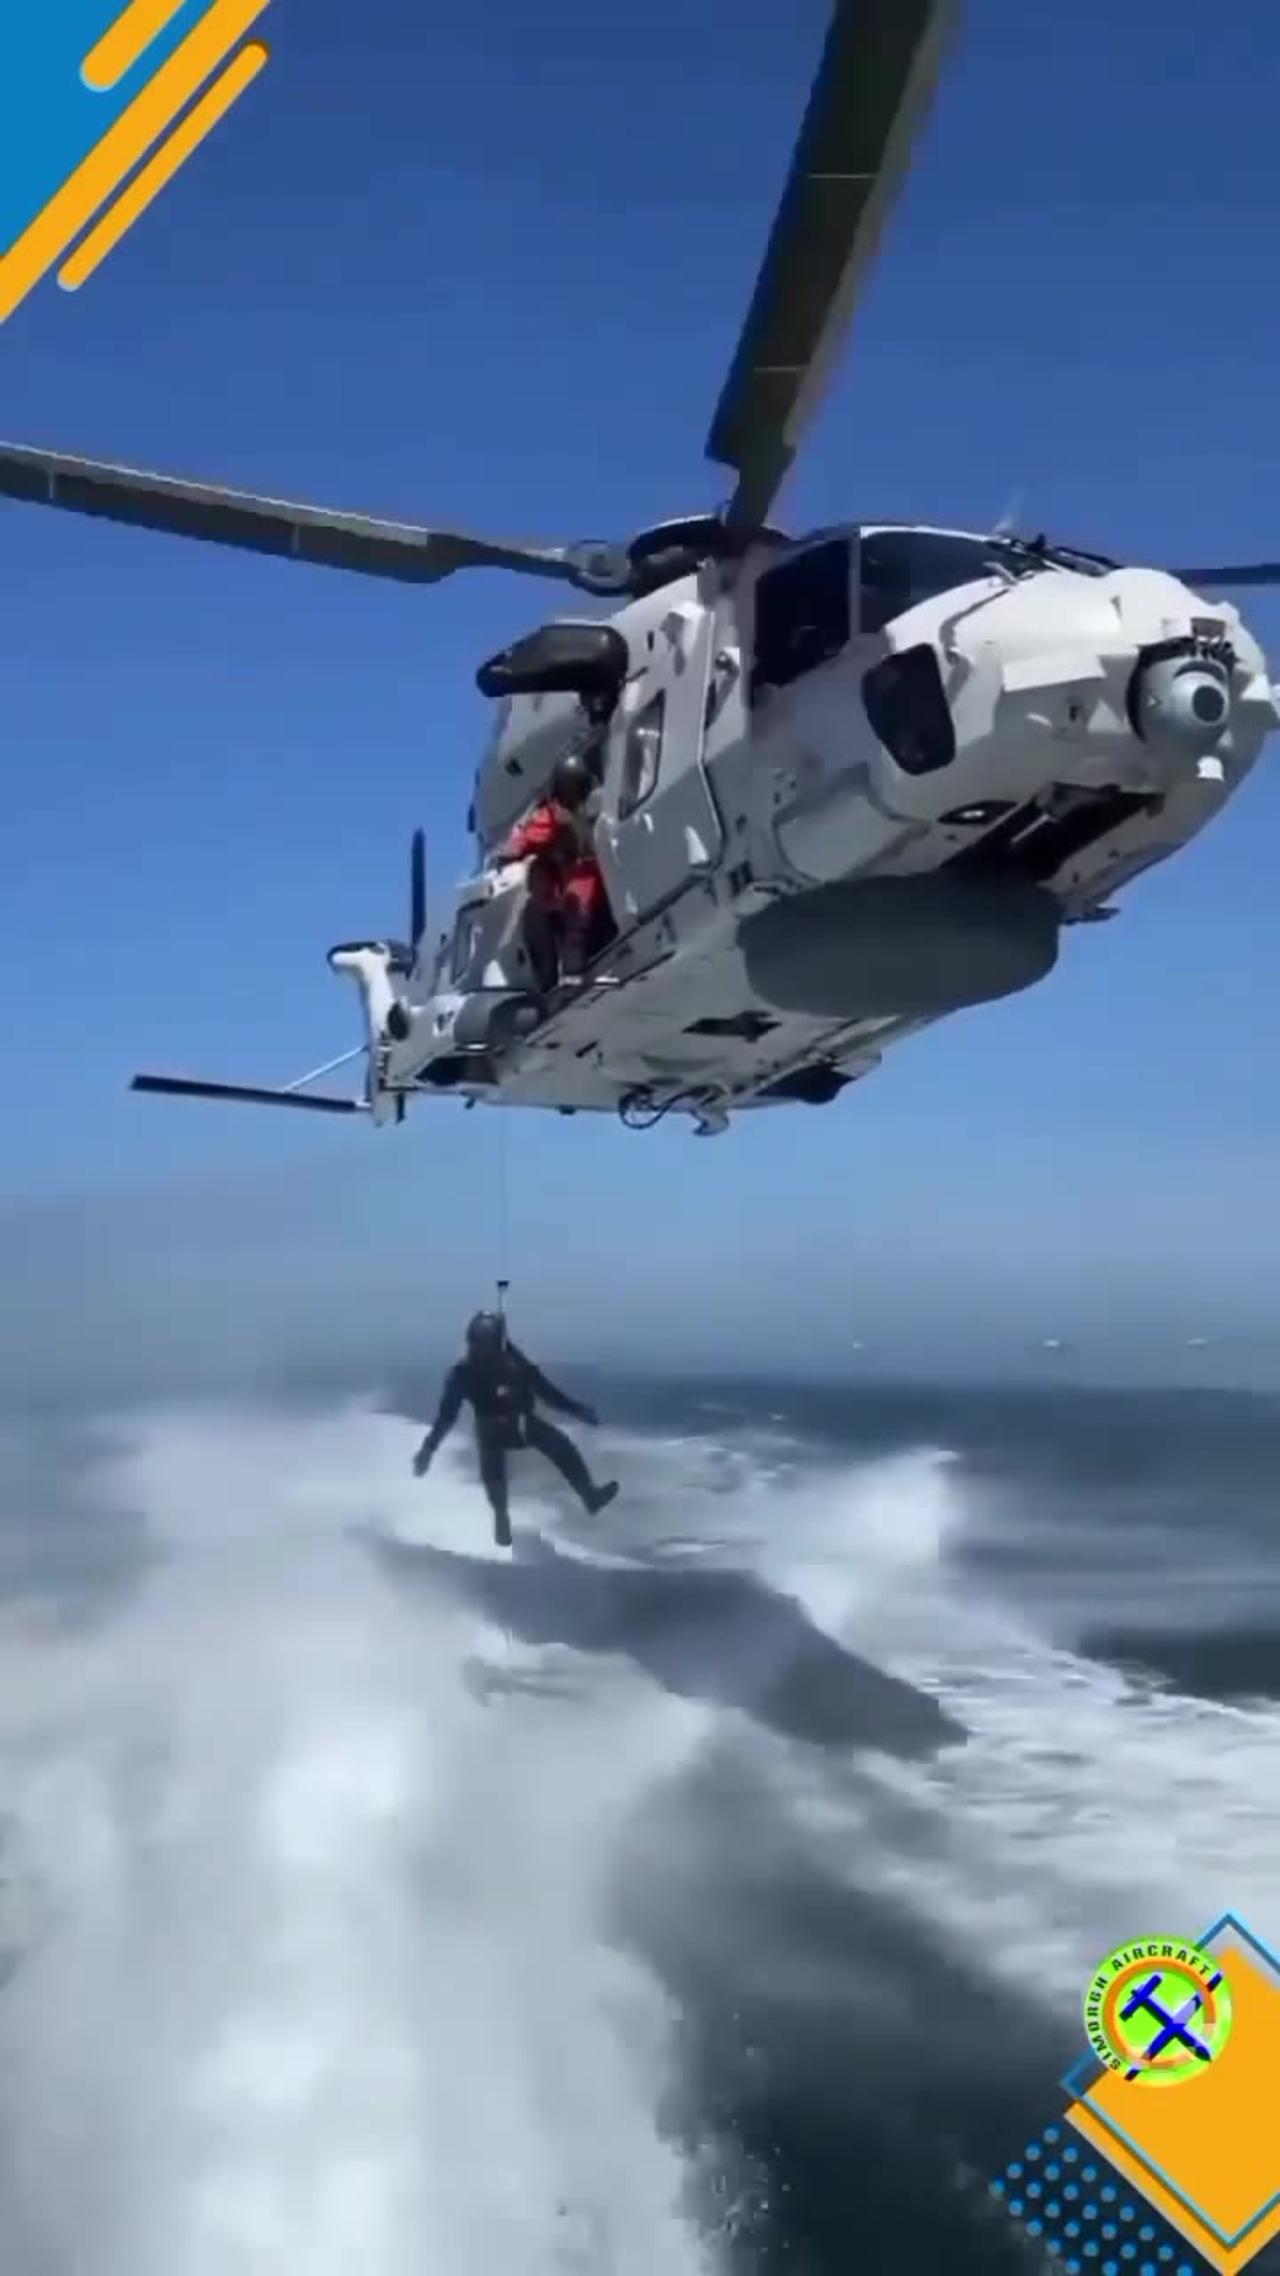 AIRBUS HELICOPTER